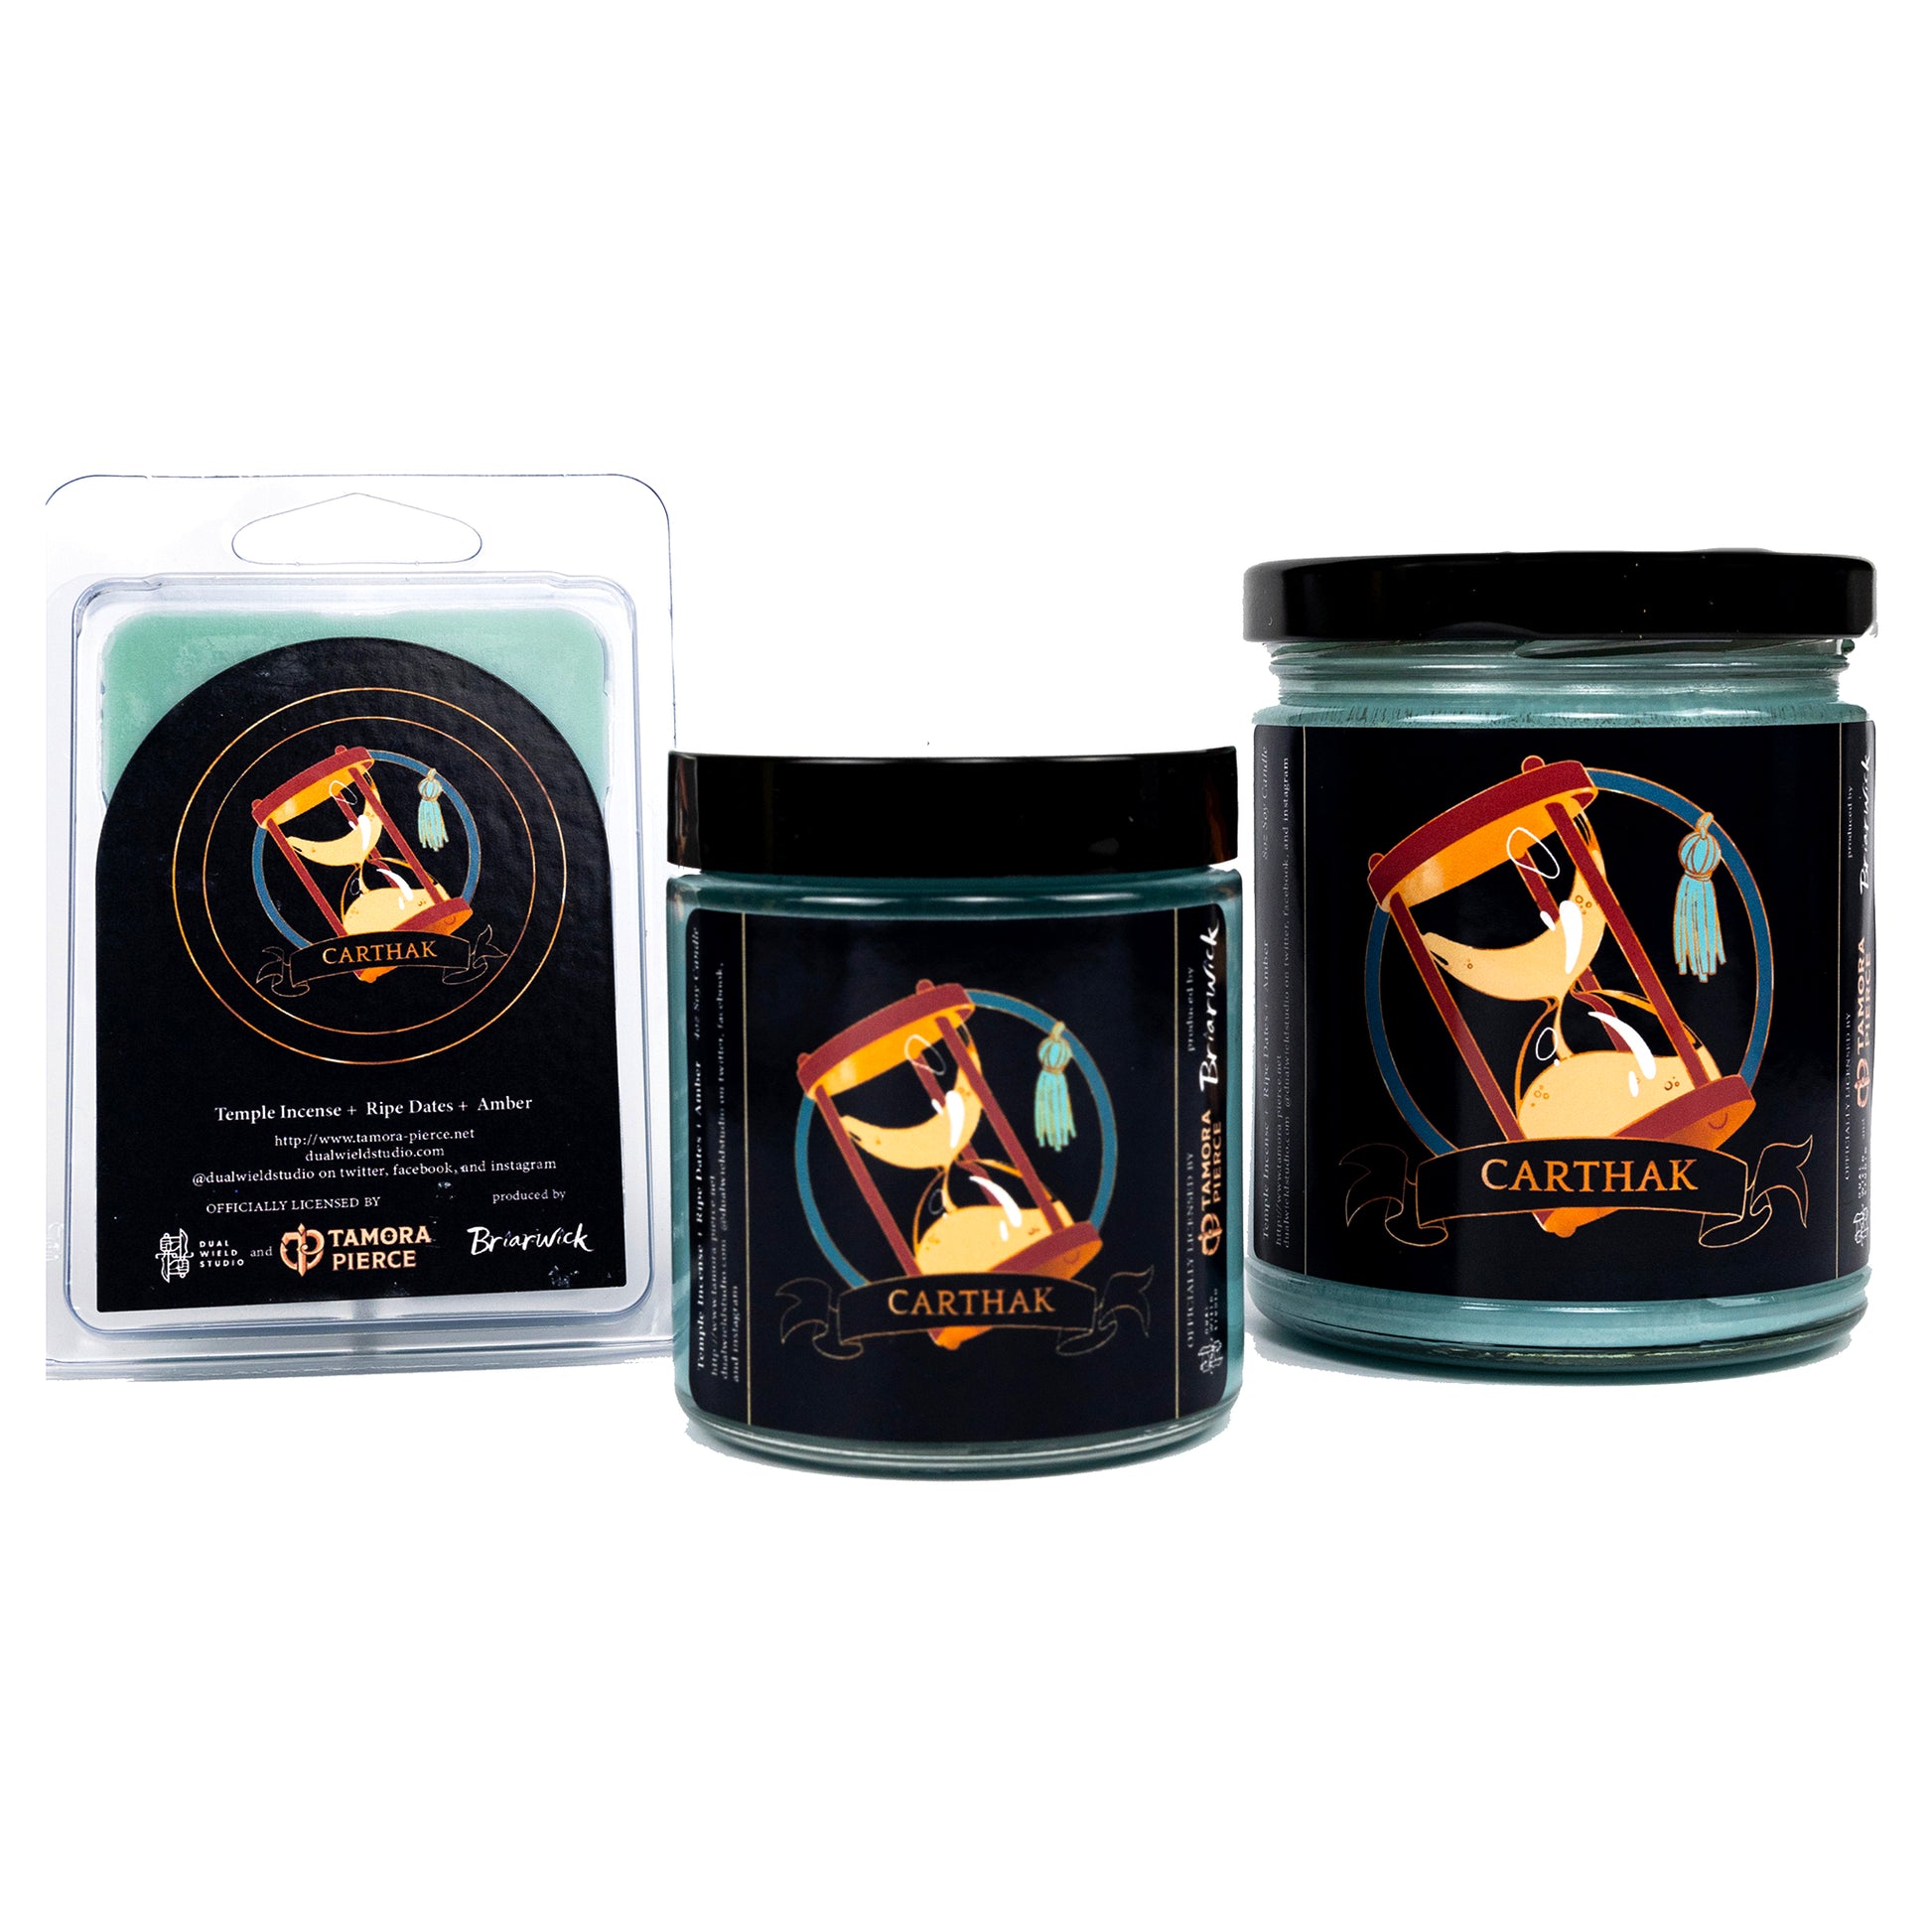 Full set of both Carthak candles and wax melts, all with turquoise wax. The label illustration shows an hourglass with "Carthak" reading on a ribbon below.